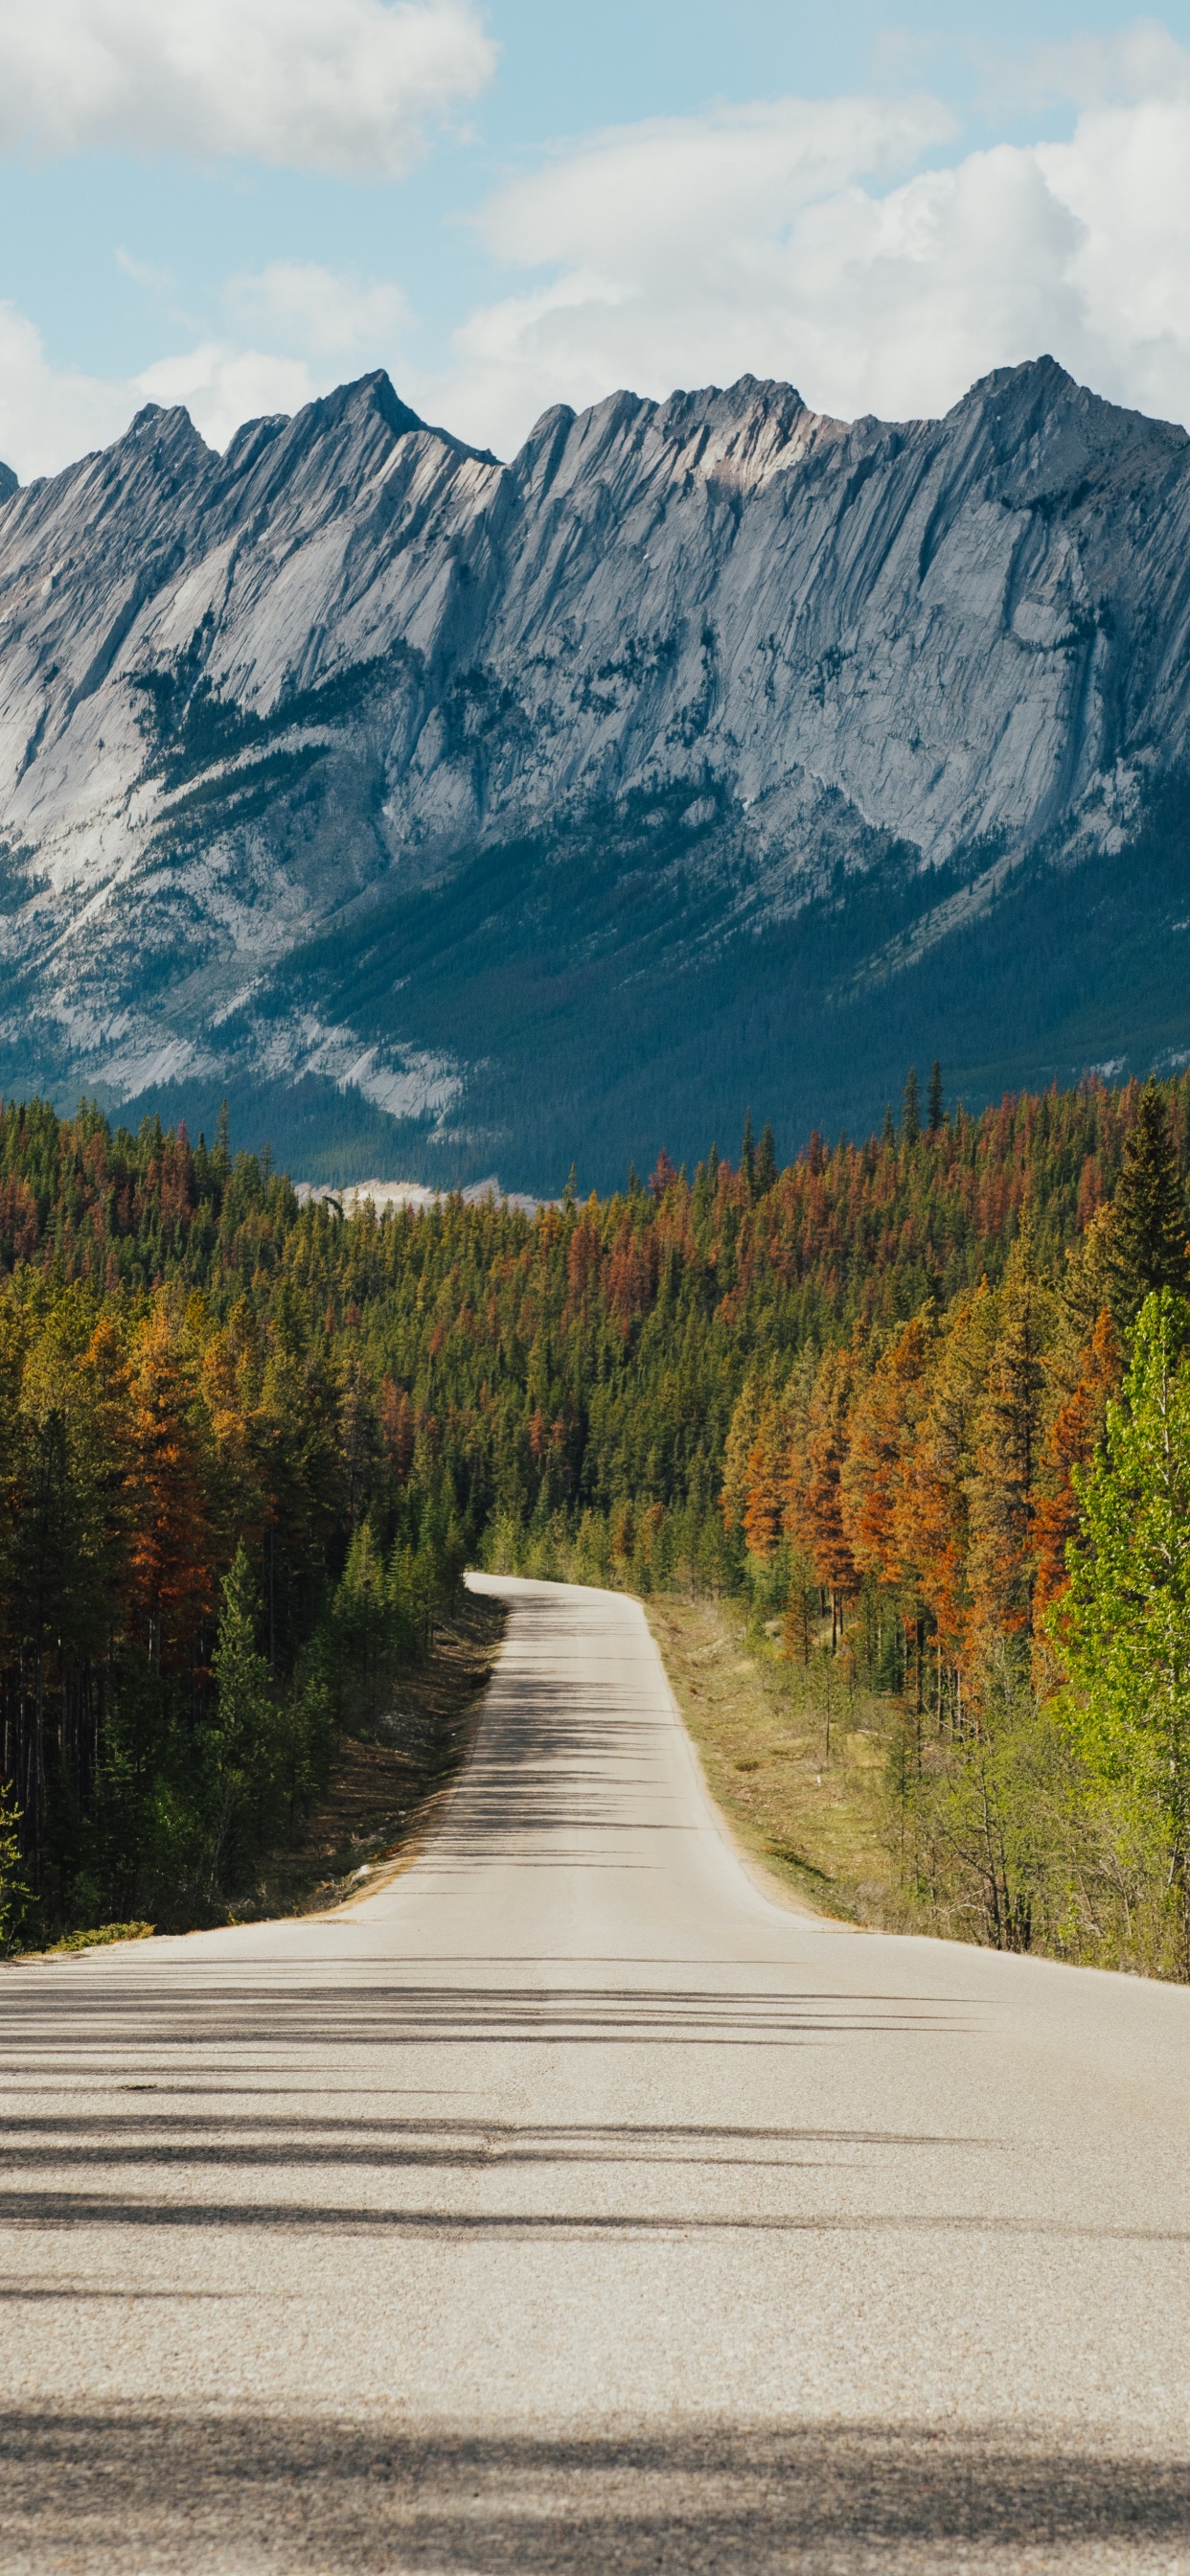 Jasper National Park Of Canada, Road, Forest Highway, Highway, Cloud. Wallpaper in 1242x2688 Resolution